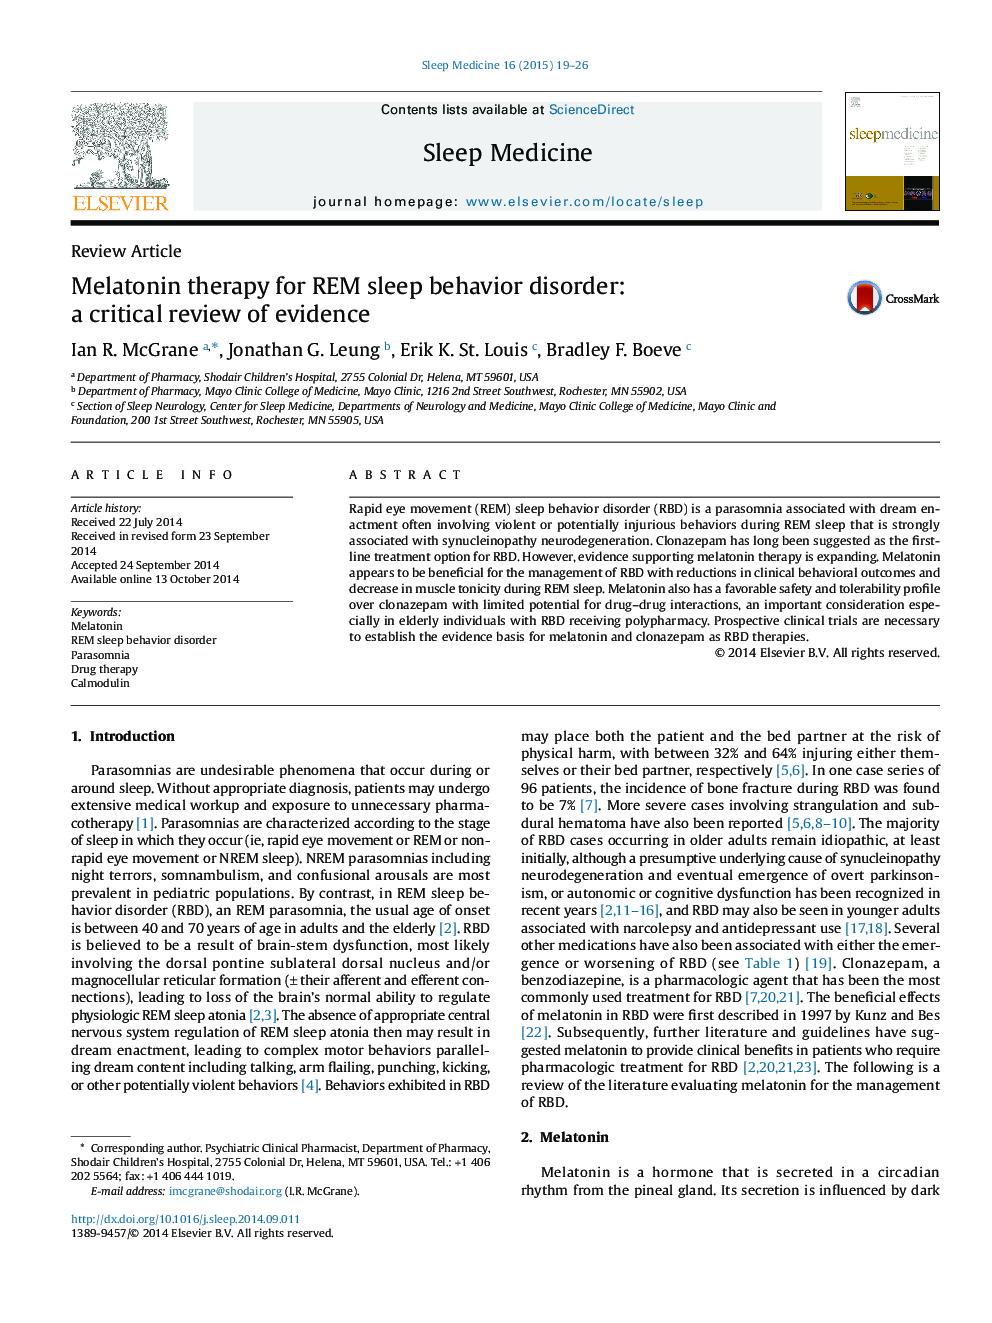 Review ArticleMelatonin therapy for REM sleep behavior disorder: a critical review of evidence